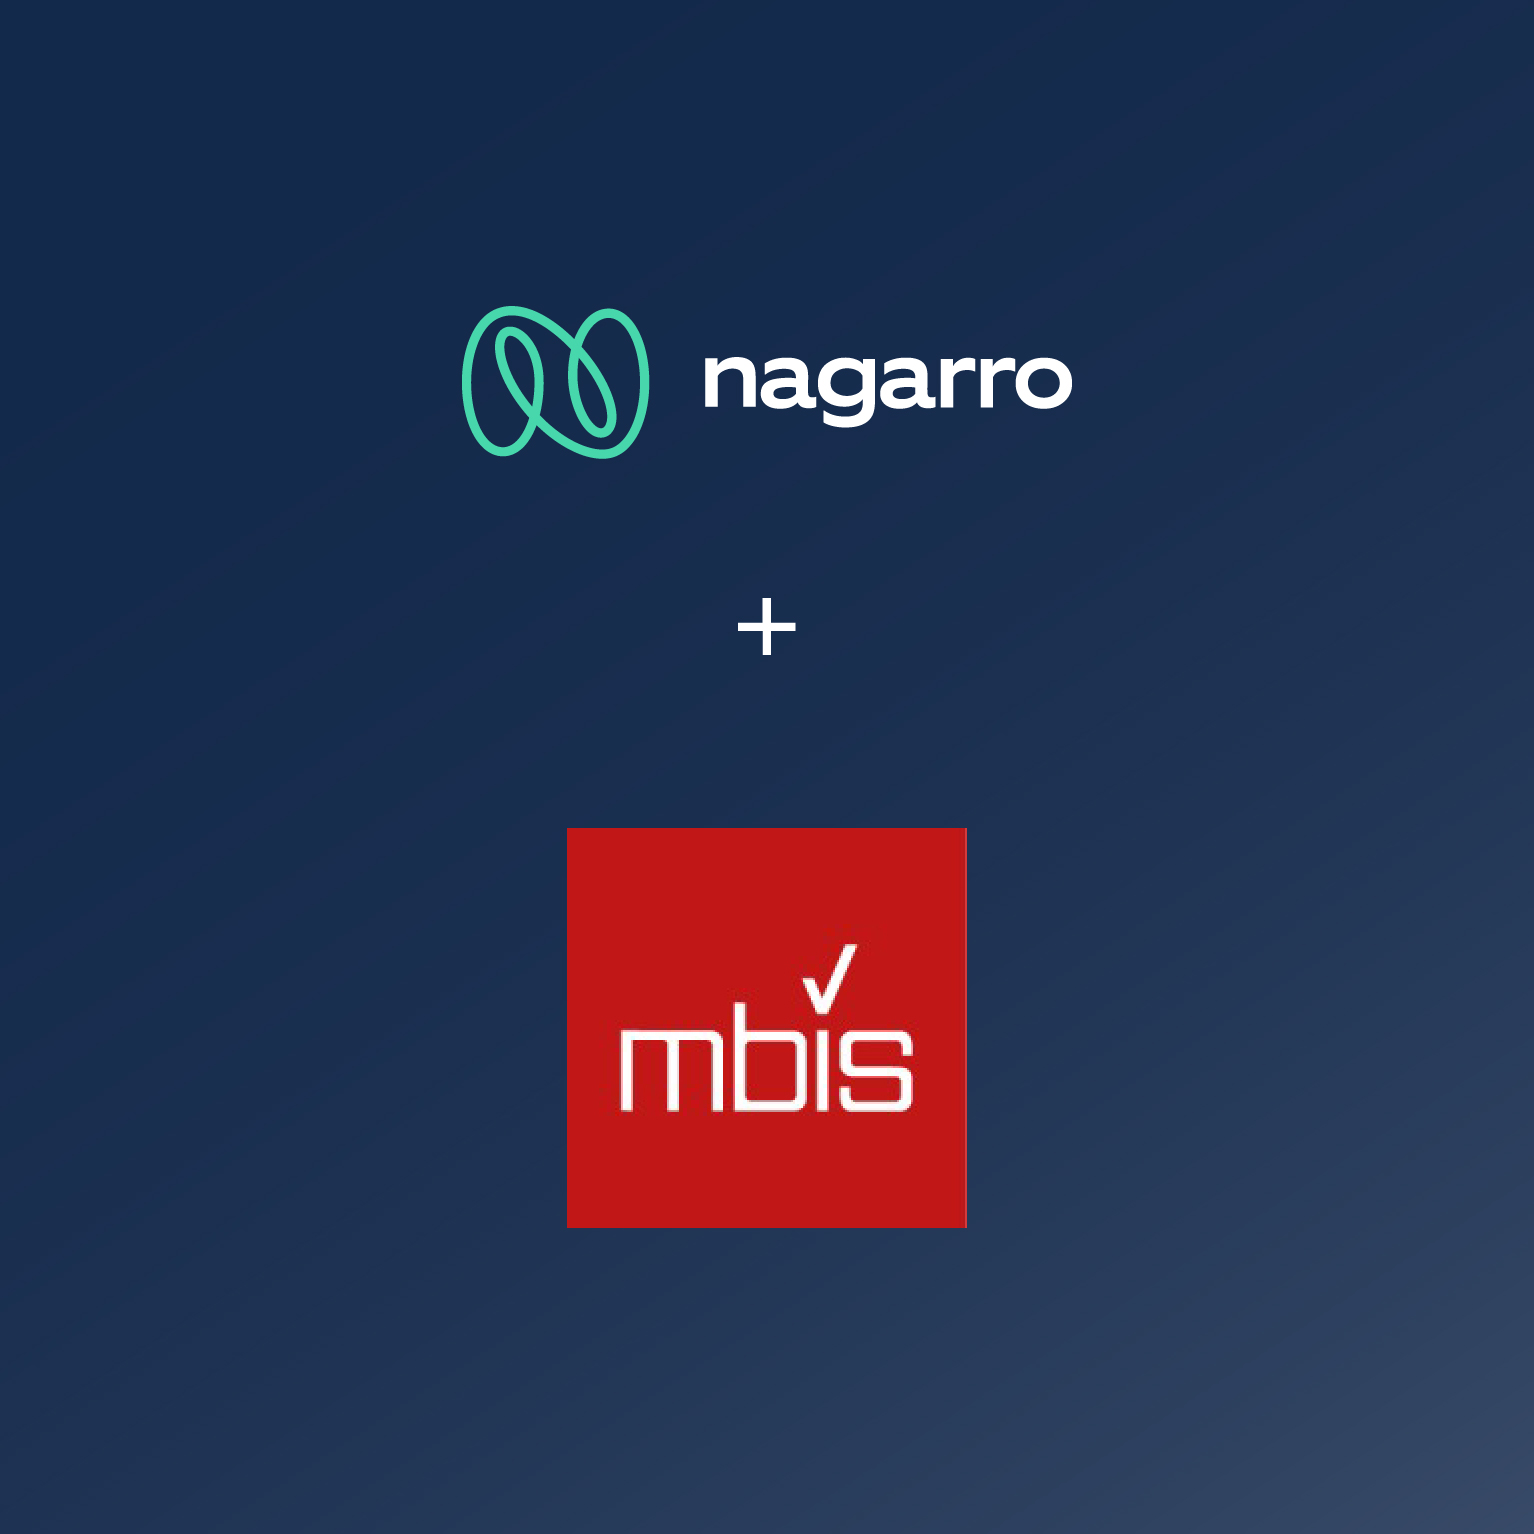 Nagarro expands footprint and SAP capabilities with acquisition of MBIS